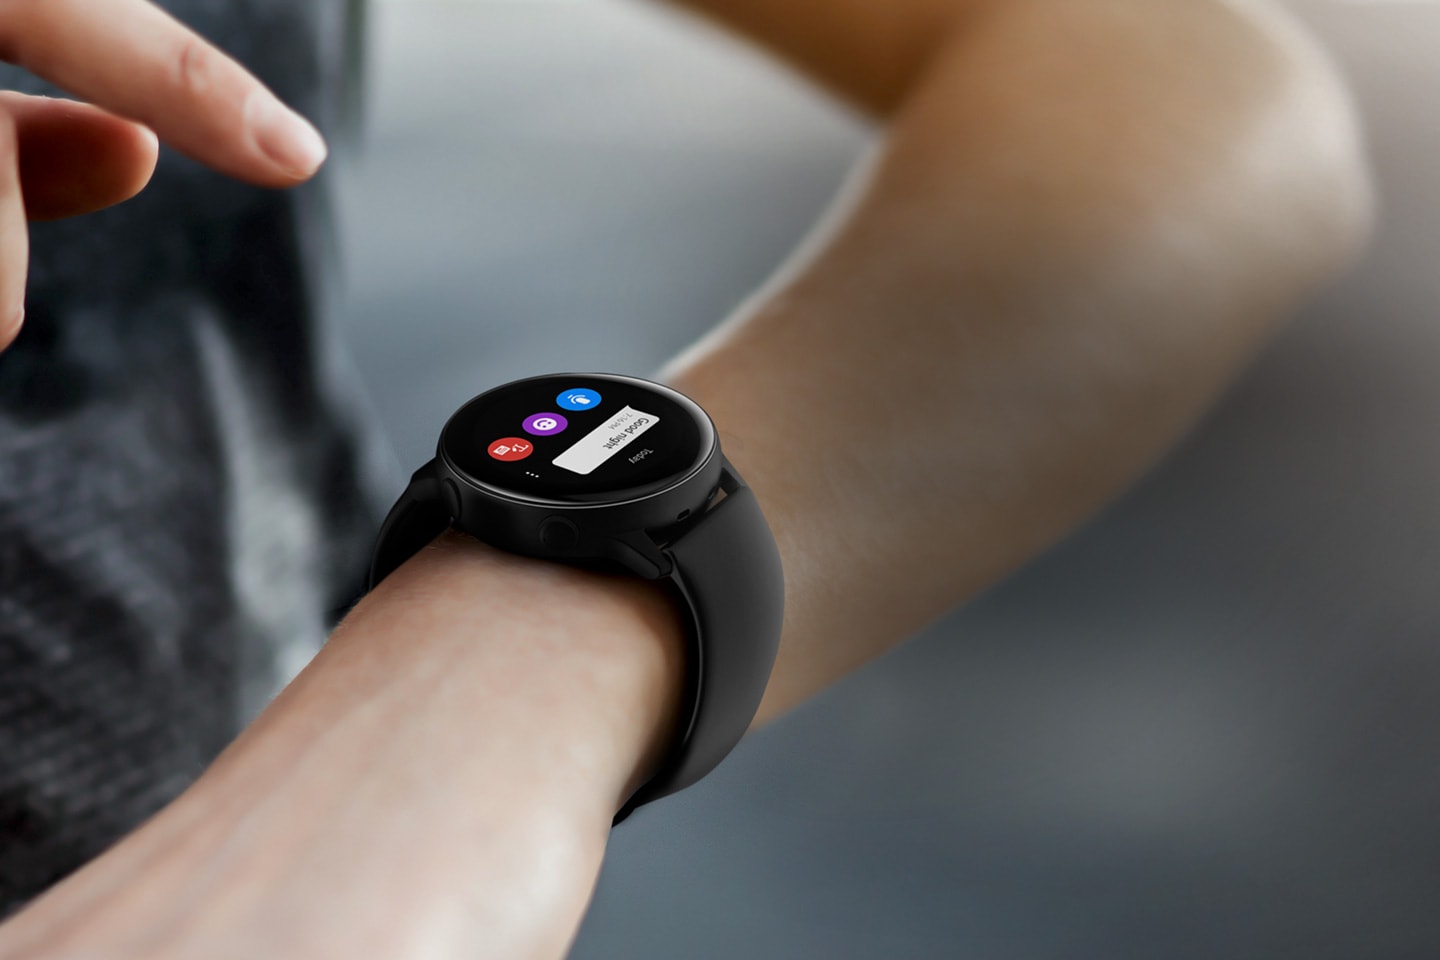 Galaxy Watch Active on your wrist lets you incoming text messages.